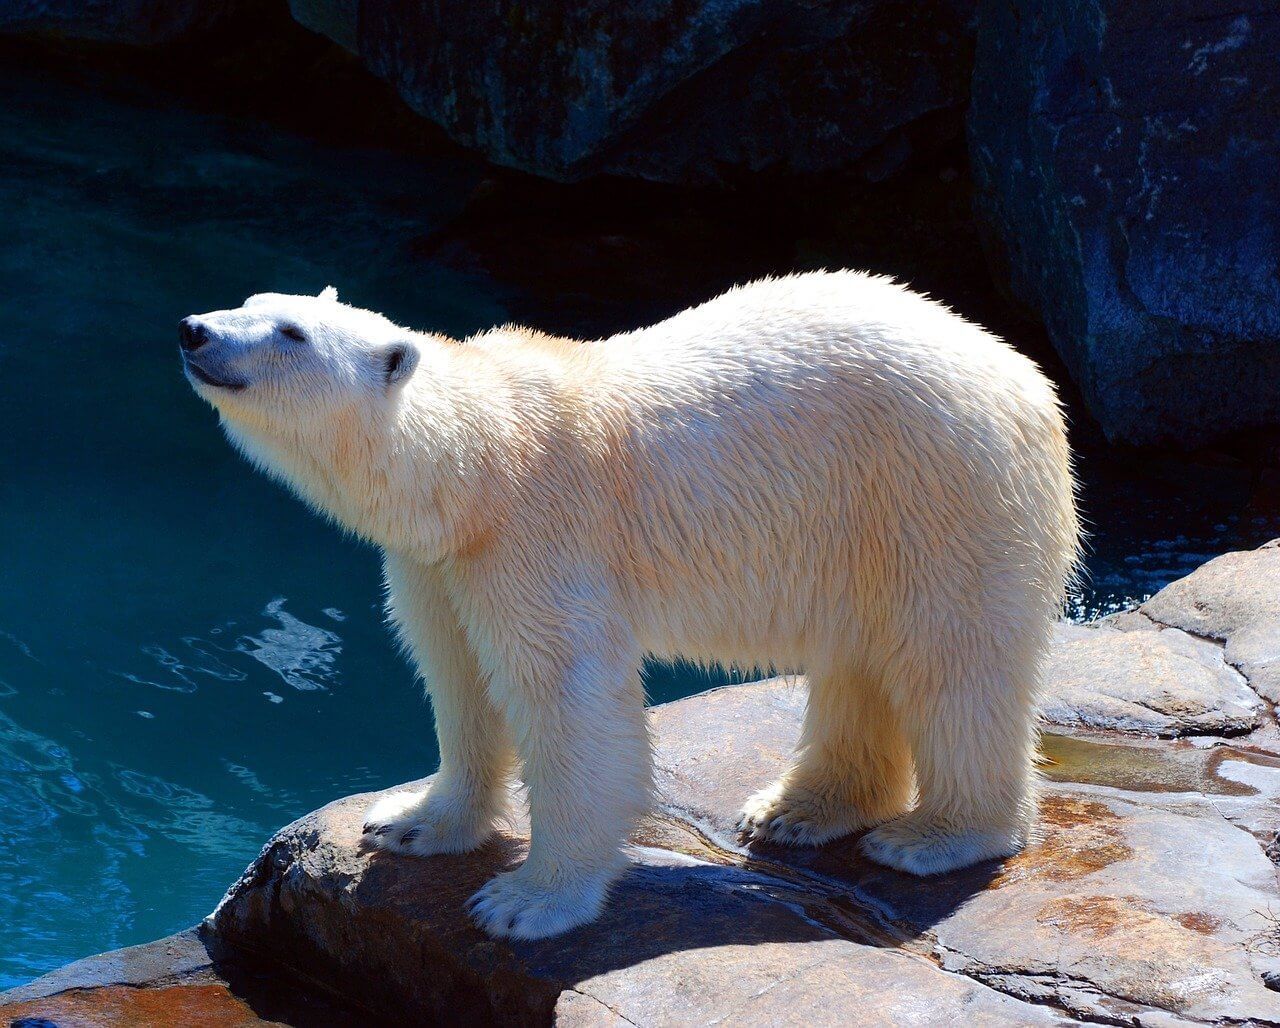 There’s Nothing Entertaining About the Way This Hotel Keeps Polar Bears Captive